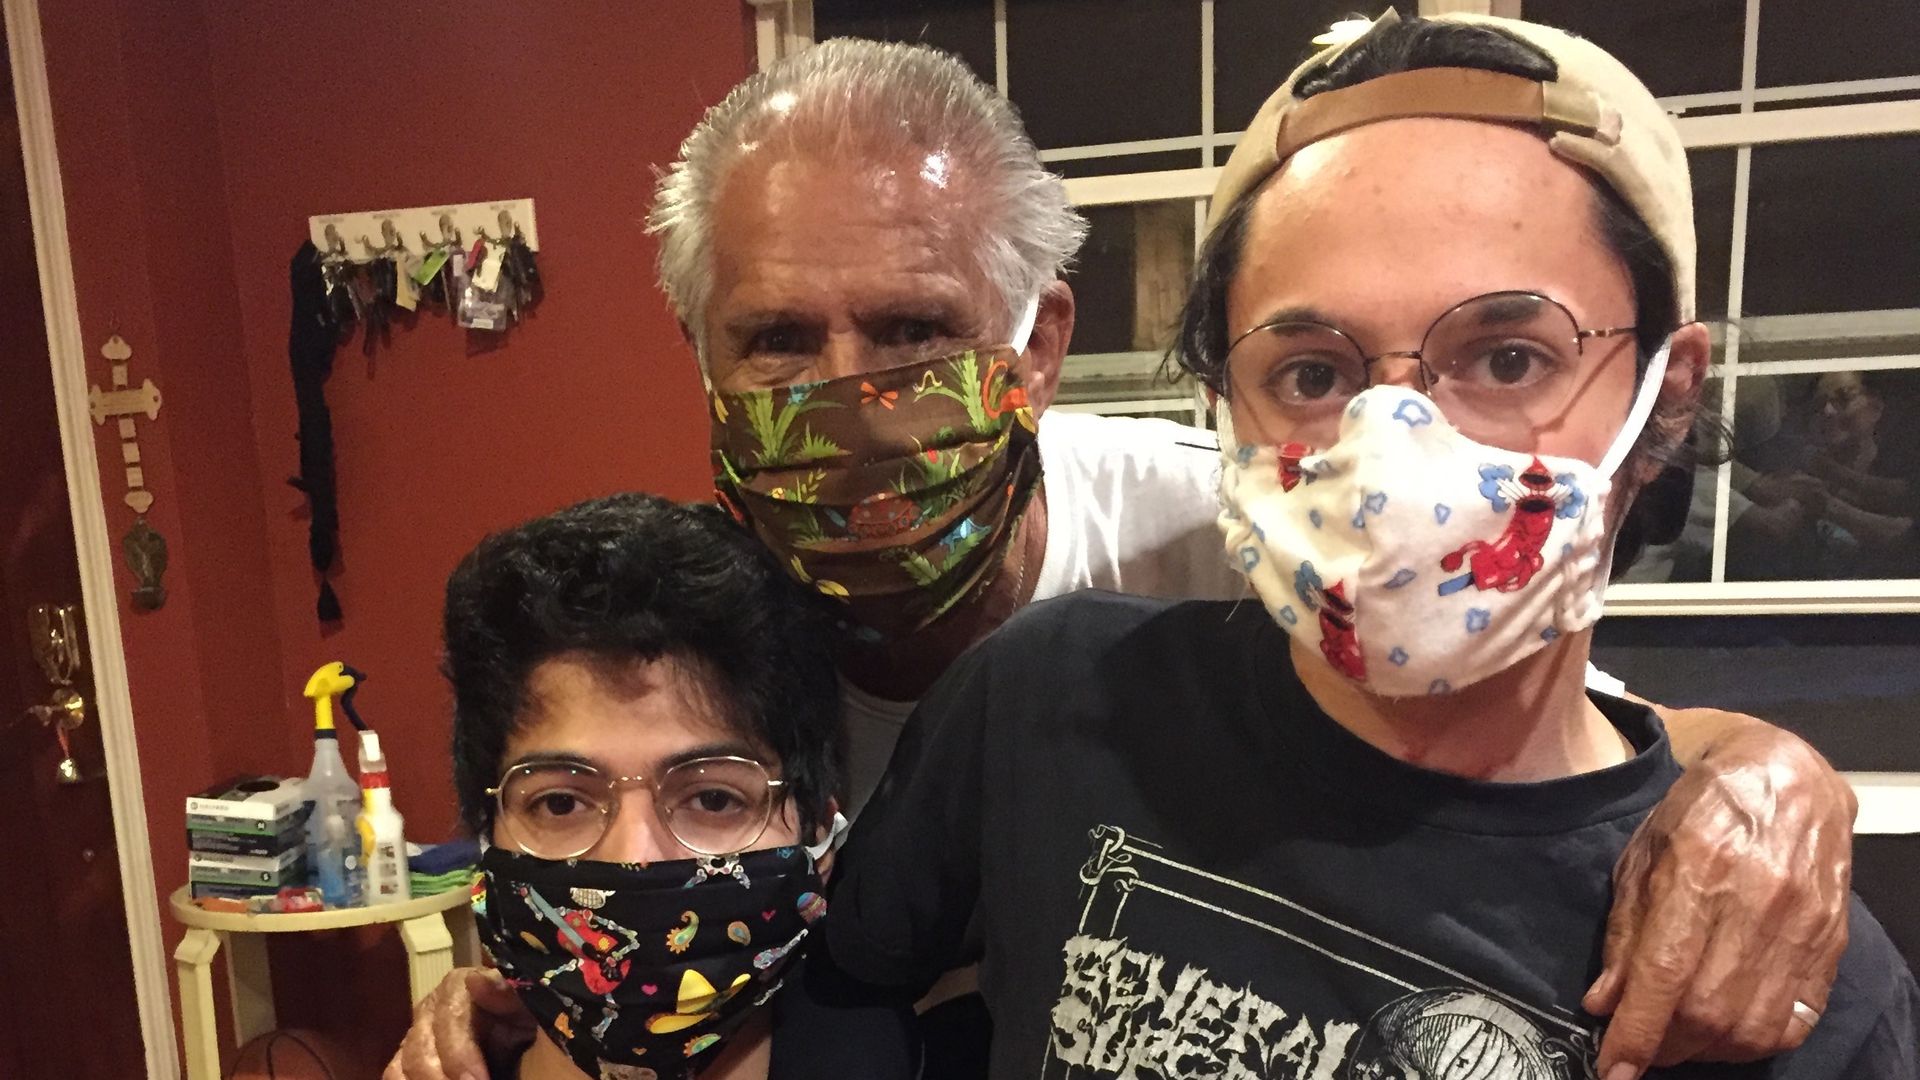 Fernando Rodriguezwith grandsons Ramón Rodriguez and Tín Rodriguez, wearing home-made masks at their home in Austin, Texas.